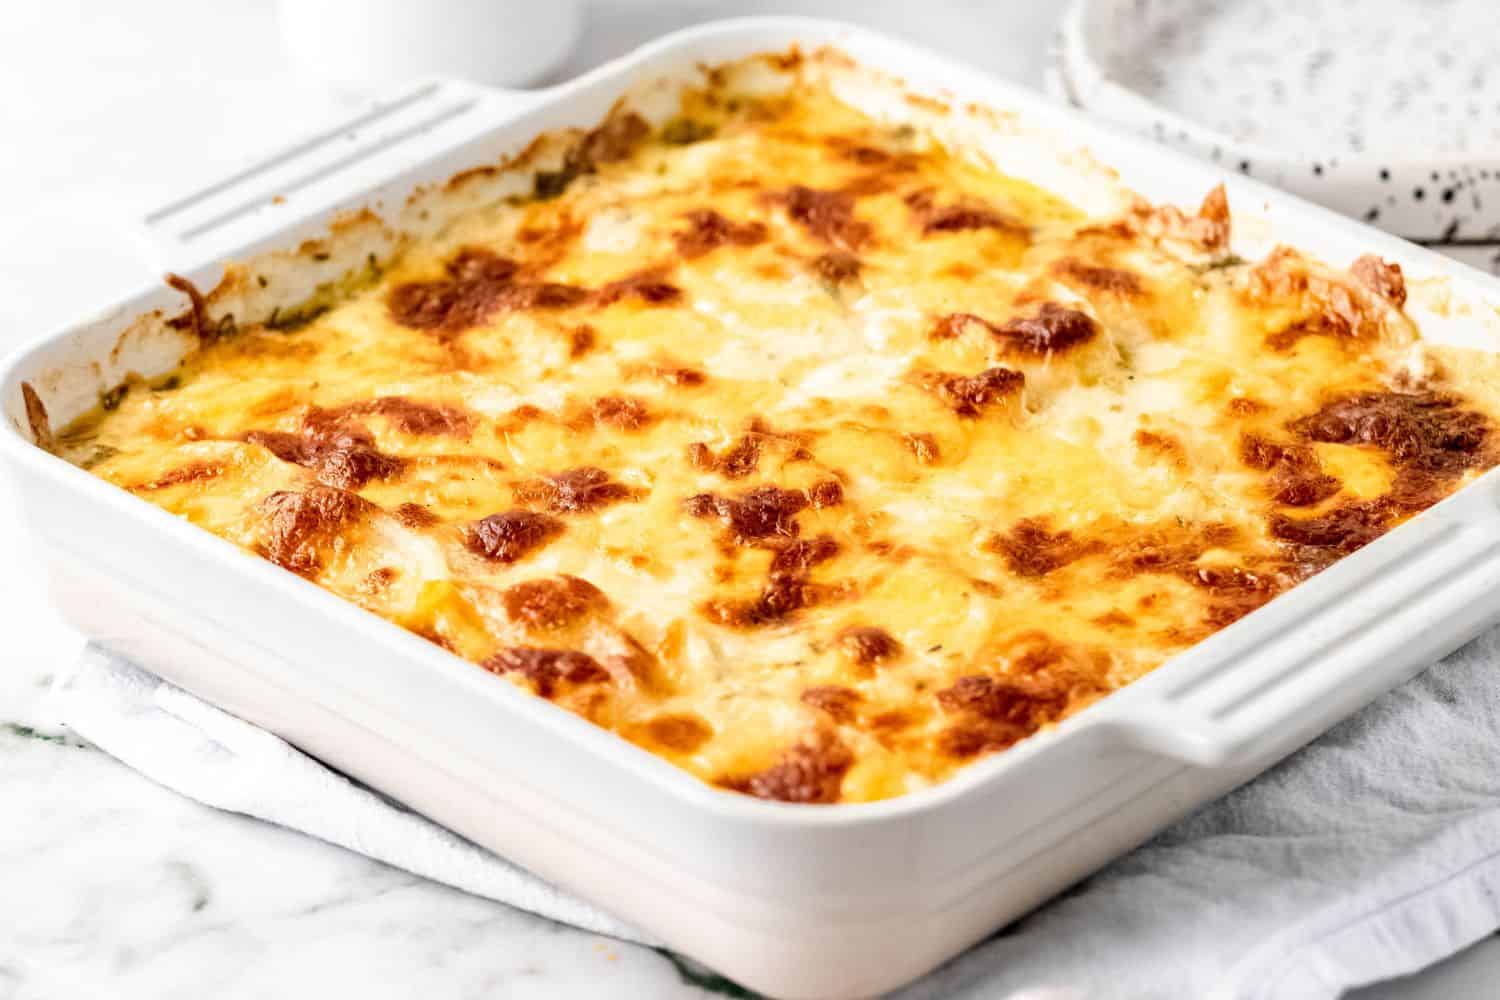 A square casserole dish filled with cheesy scalloped potatoes set on a dish towel to cool.